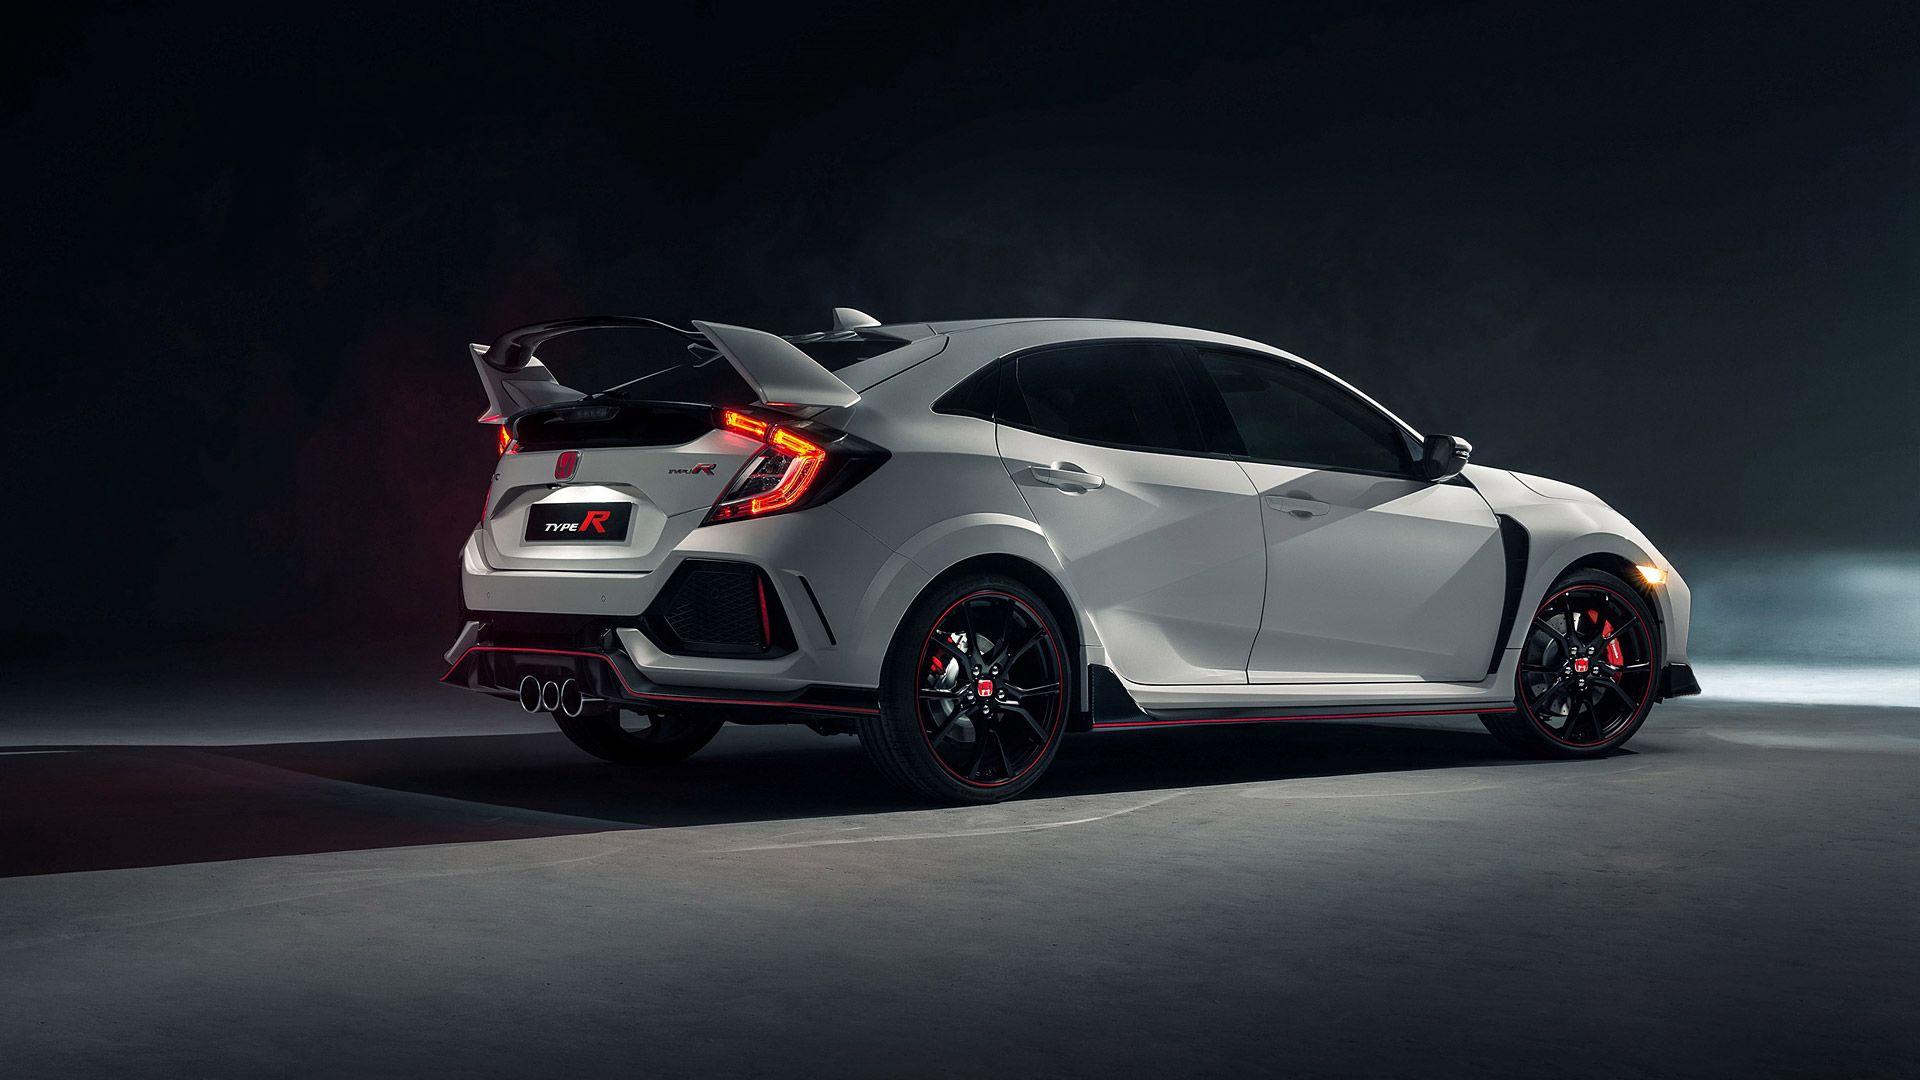 Honda Civic Type R Wallpaper and Background Image